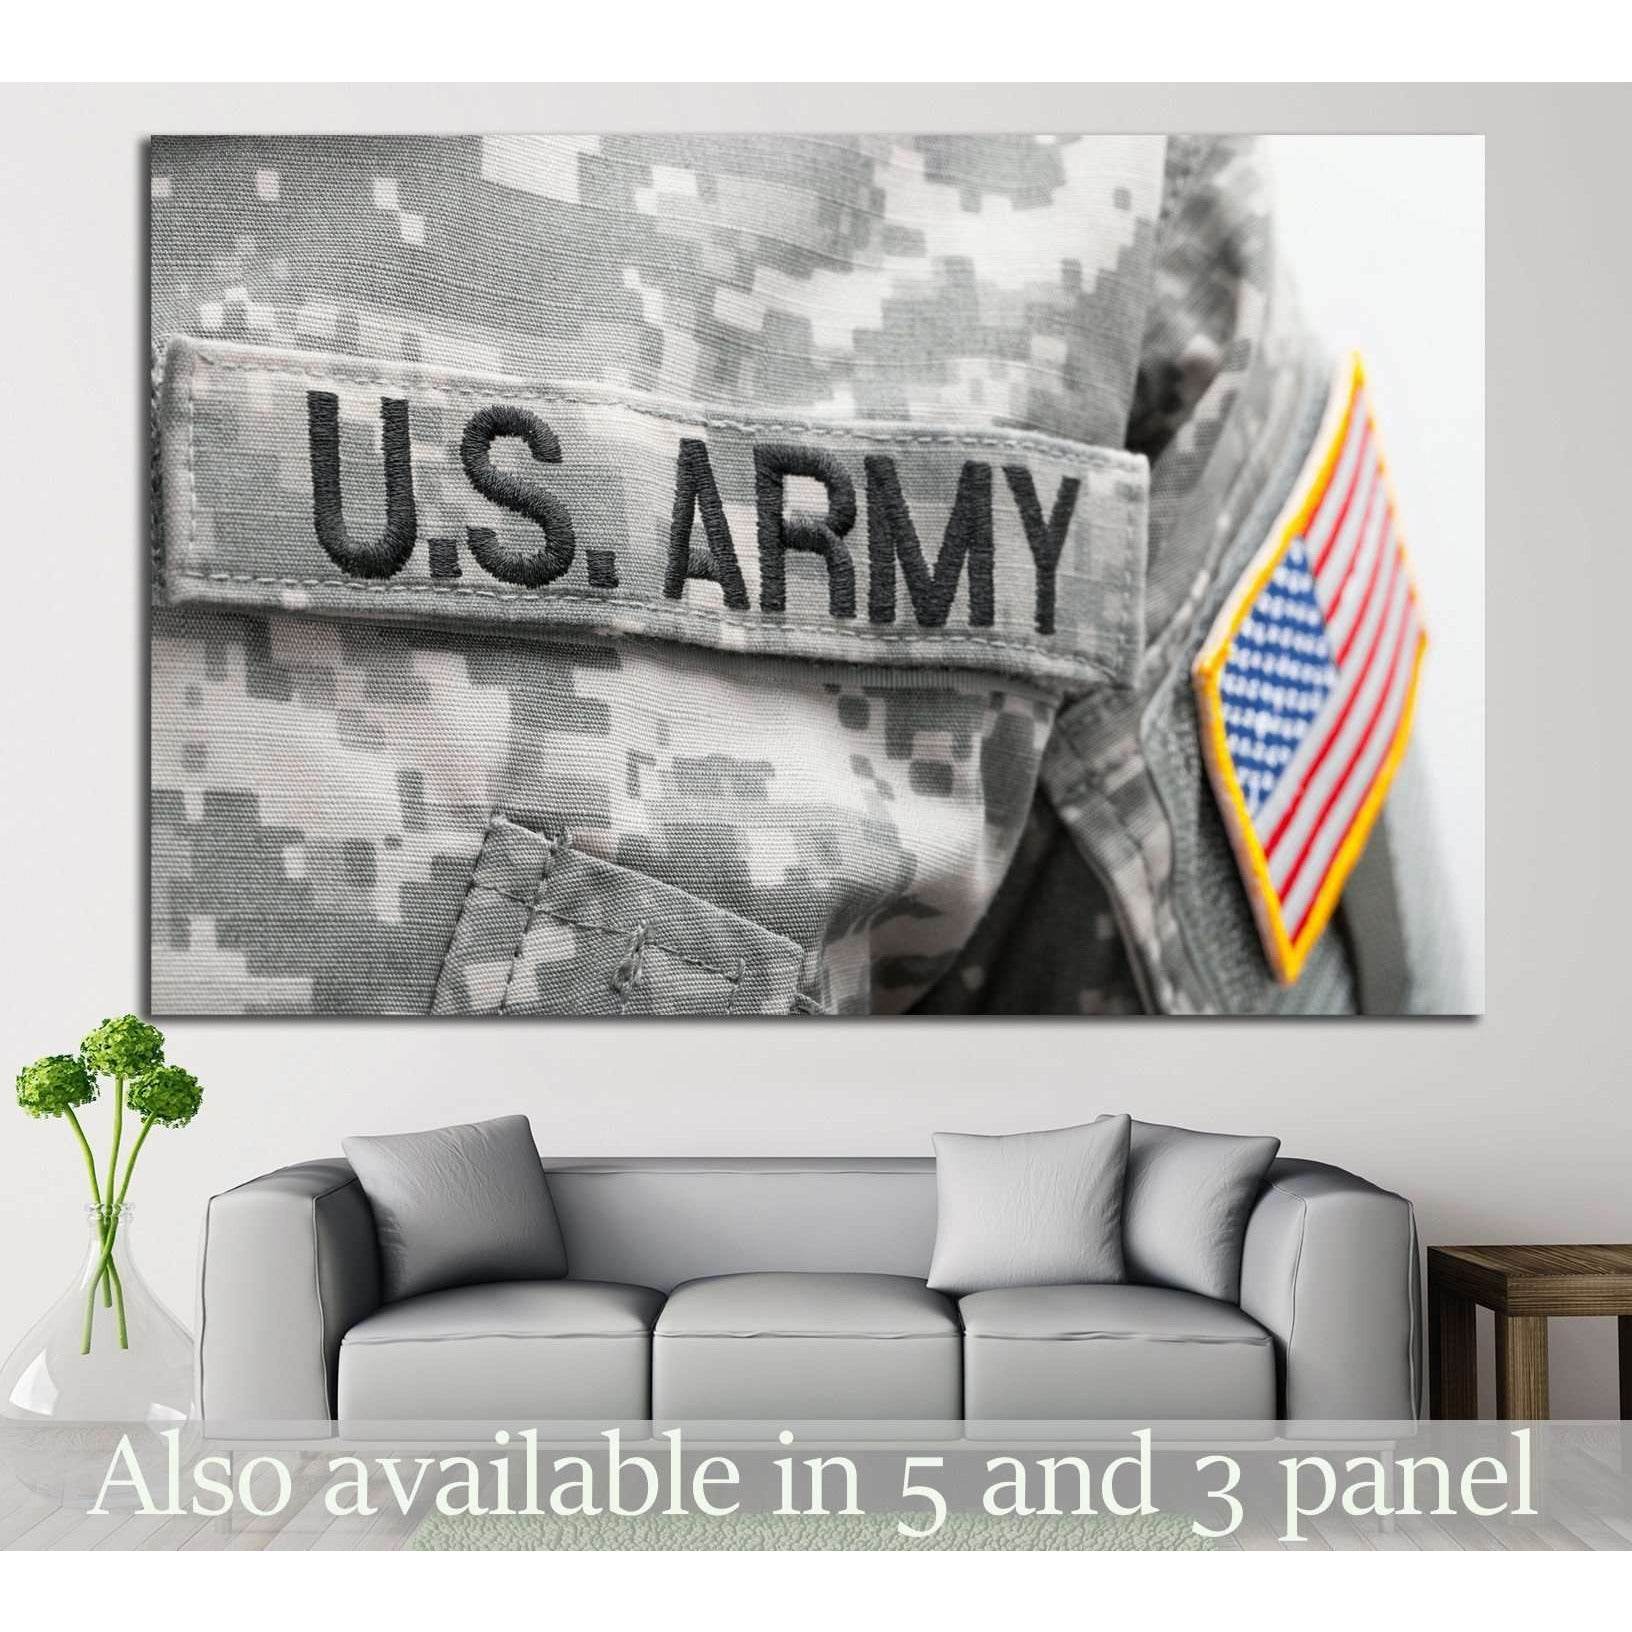 U.S. ARMY №714 Ready to Hang Canvas Print